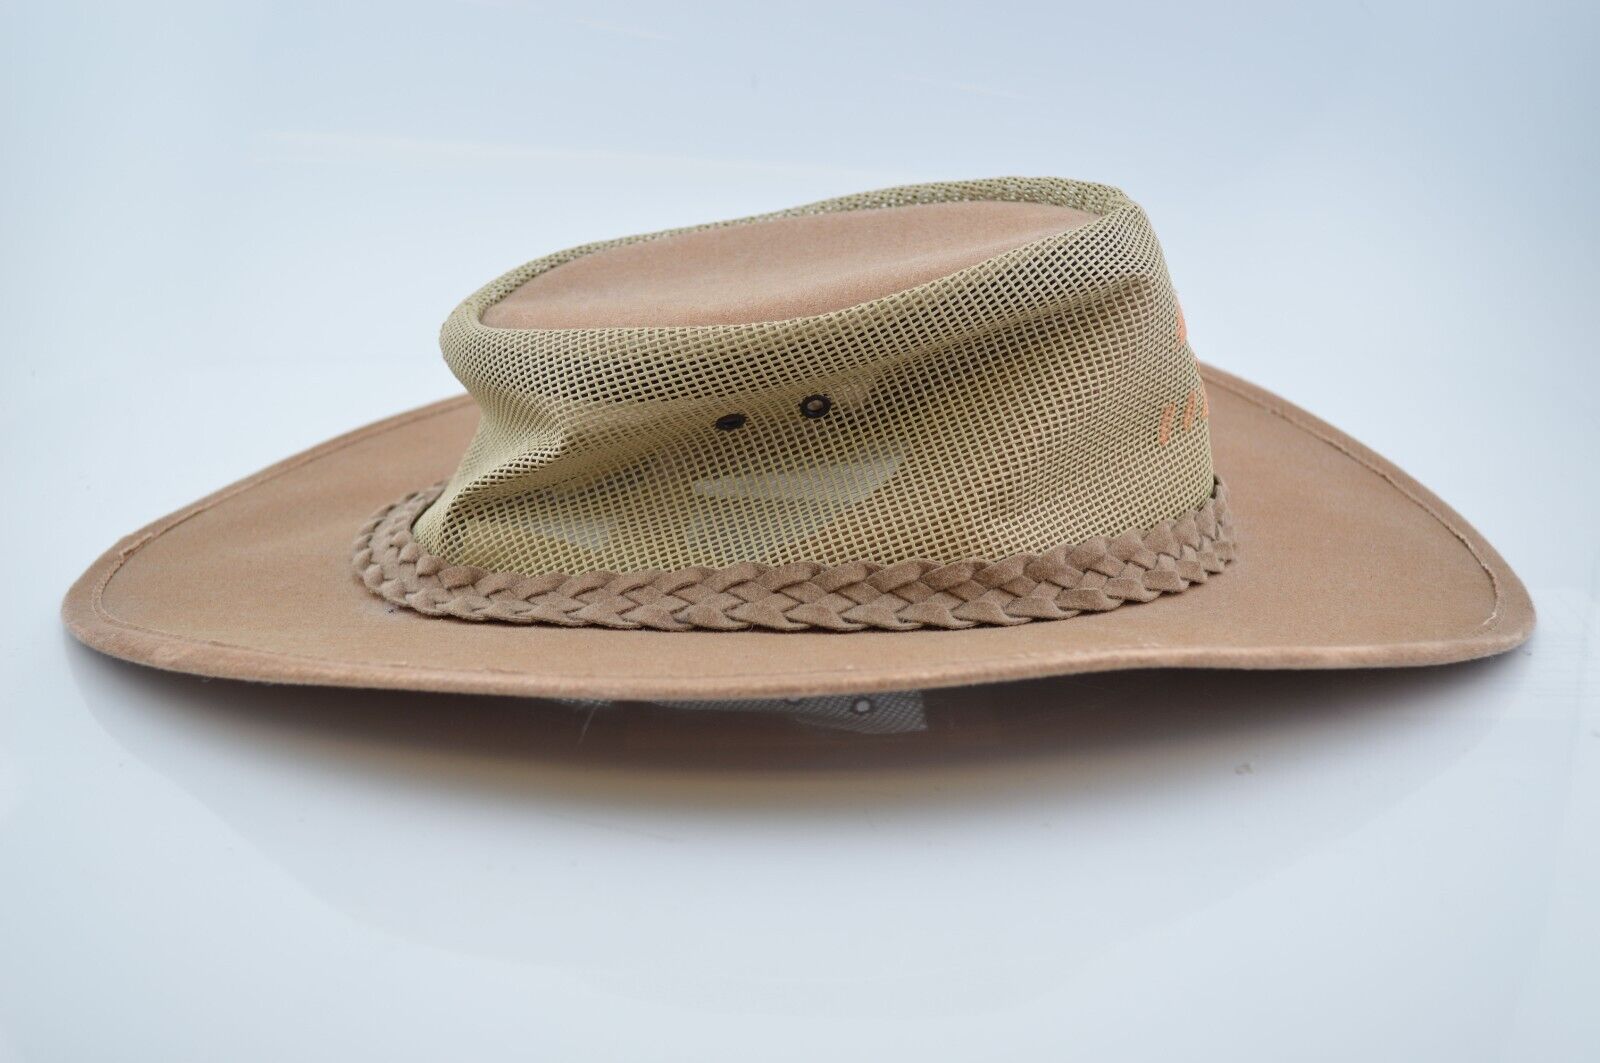 Aussie Chiller Hat 'Soak Me' "DORAL" Perforated O… - image 4